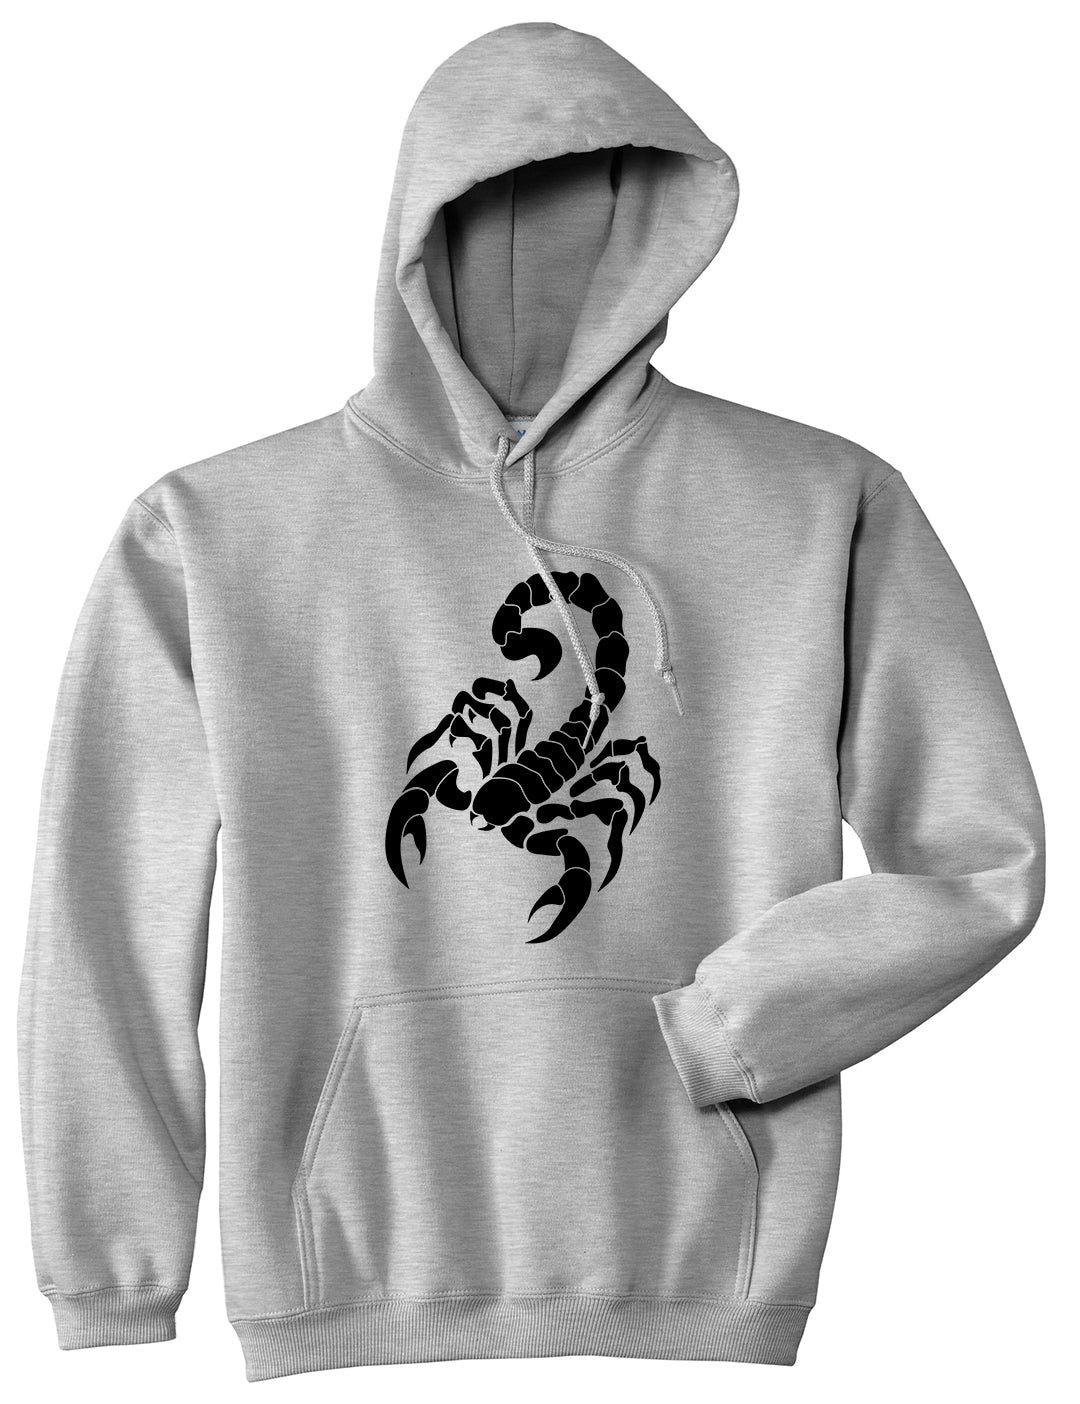 Scorpion Mens Pullover Hoodie Grey by Kings Of NY